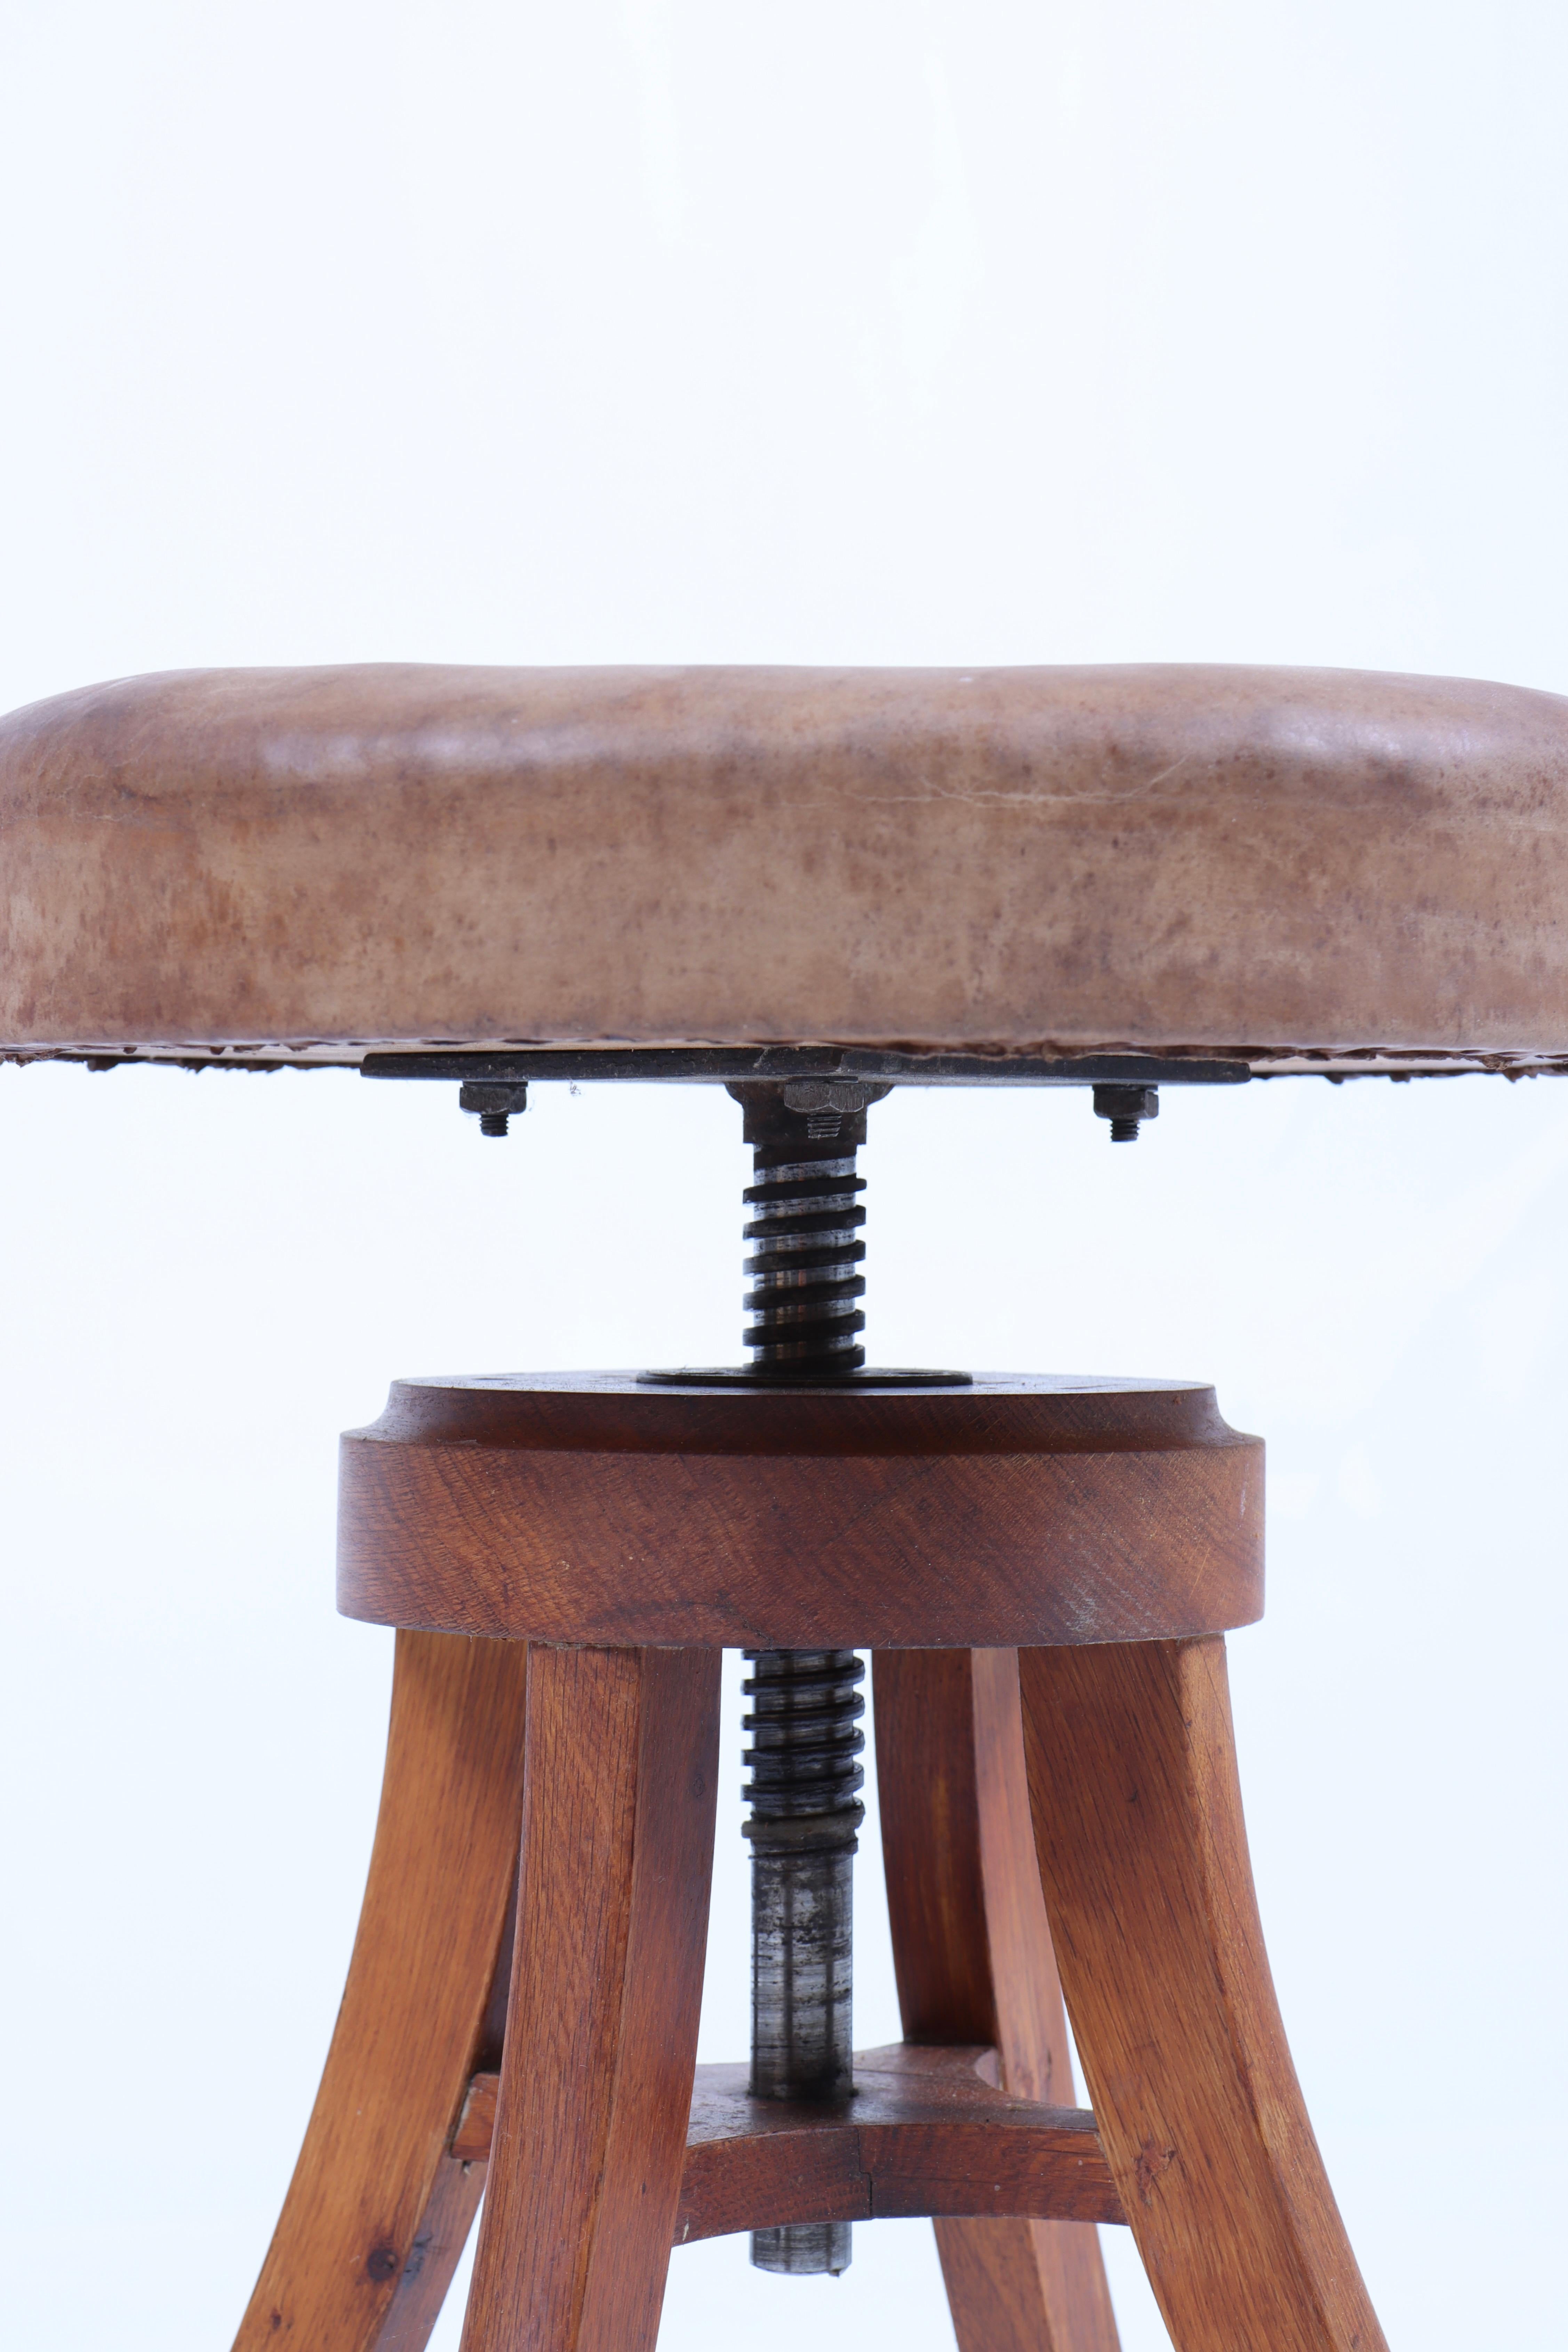 Scandinavian Modern Adjustable Artist Stool in Oak and Patinated Leather, Denmark, 1930s For Sale